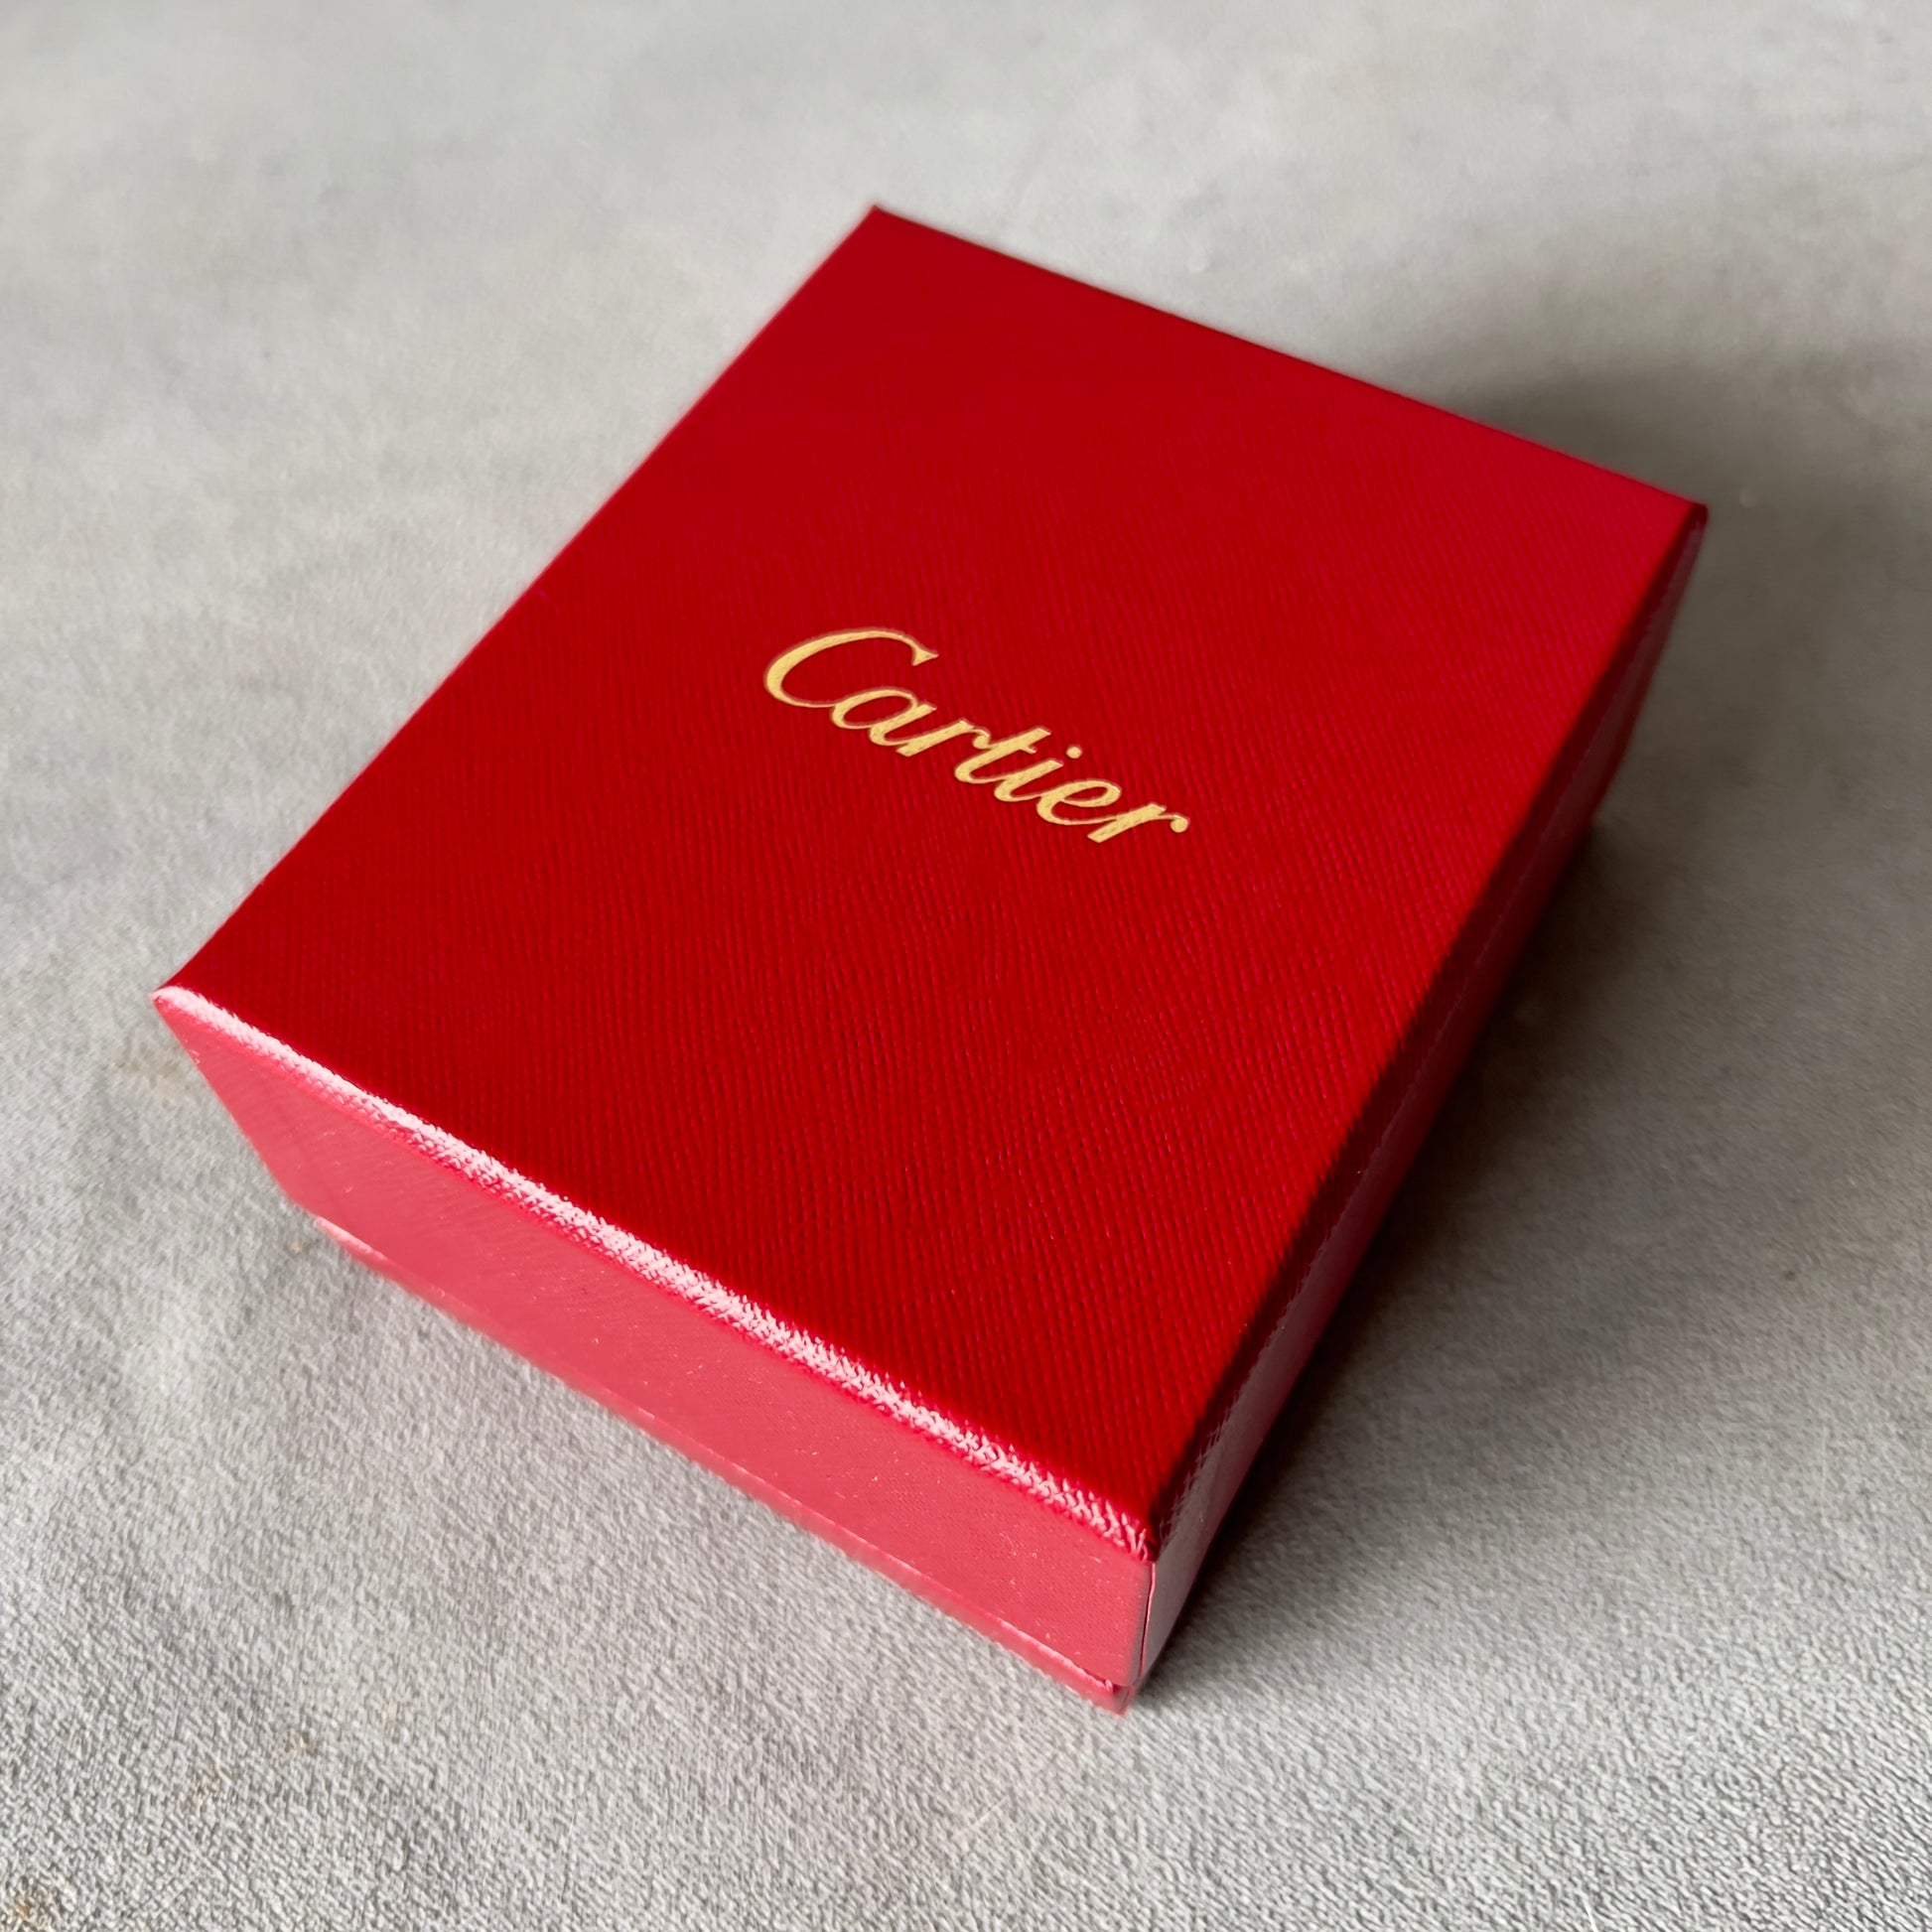 CARTIER Double Alliance Ring Box + Outer Box 4.5x3.60x2 inches